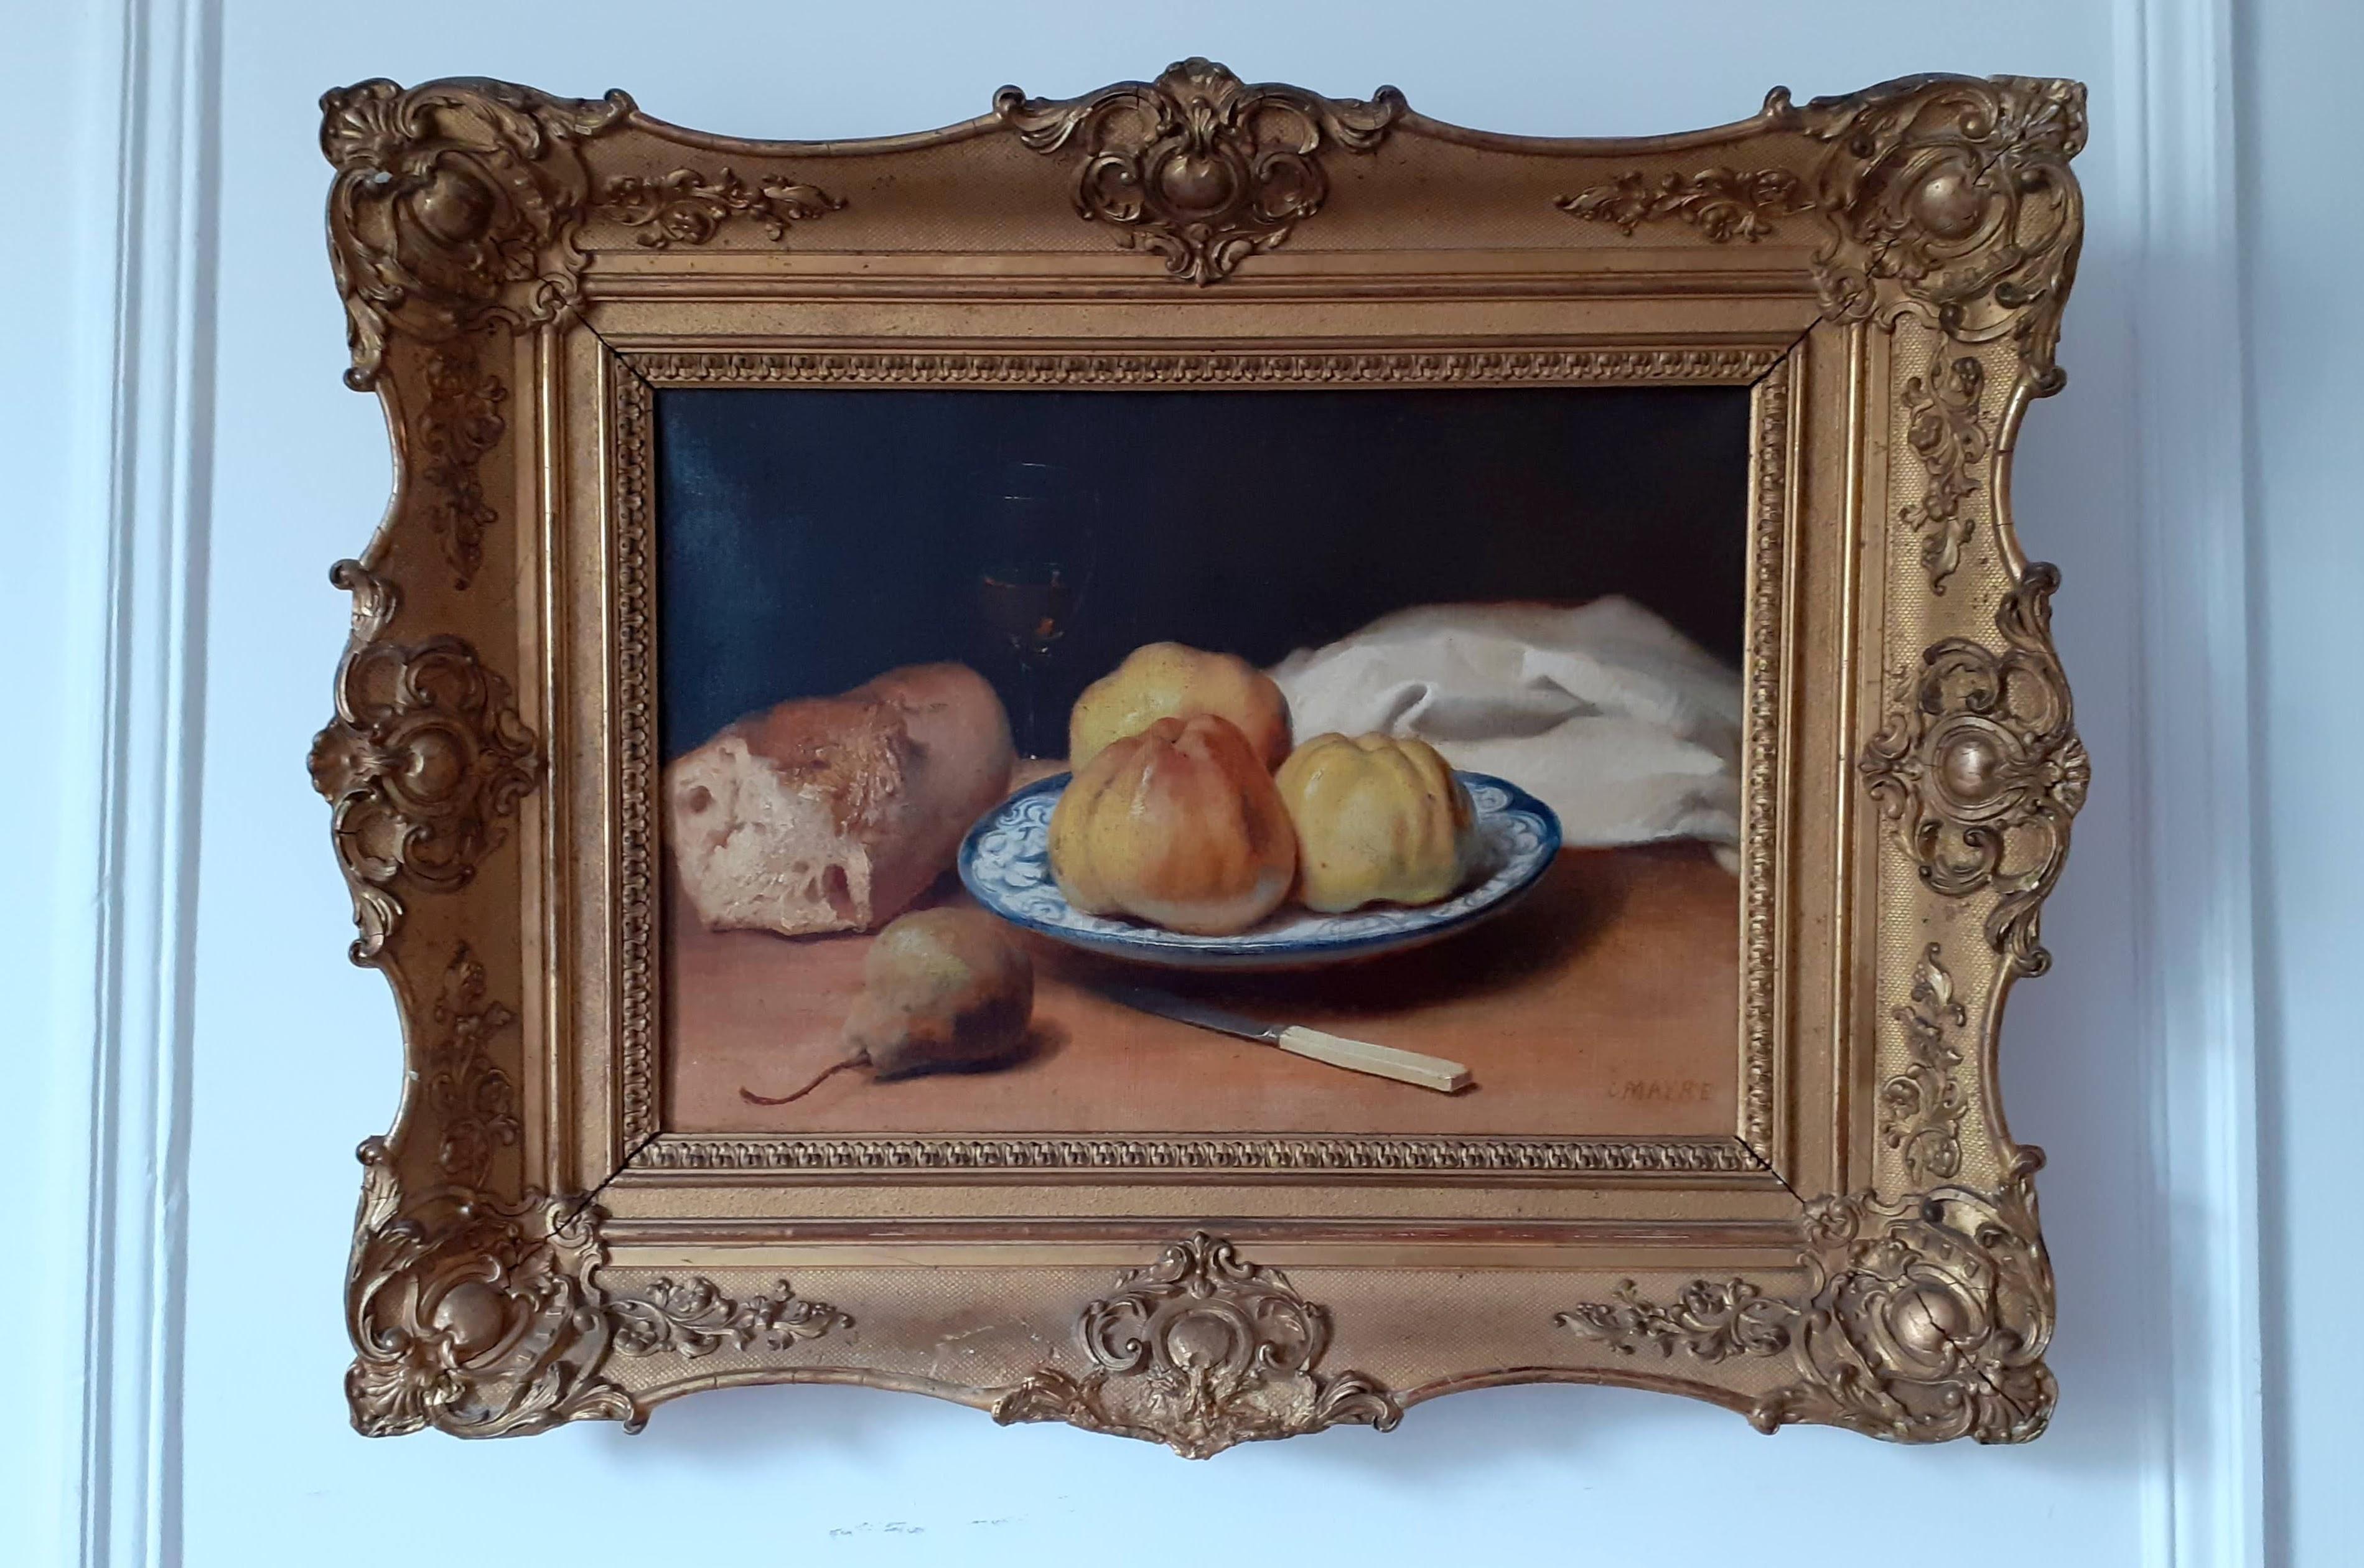 Rustic Apples and Bread Food Still Life French Salon Academic Antique Painting   - Brown Still-Life Painting by Charles Mayre 